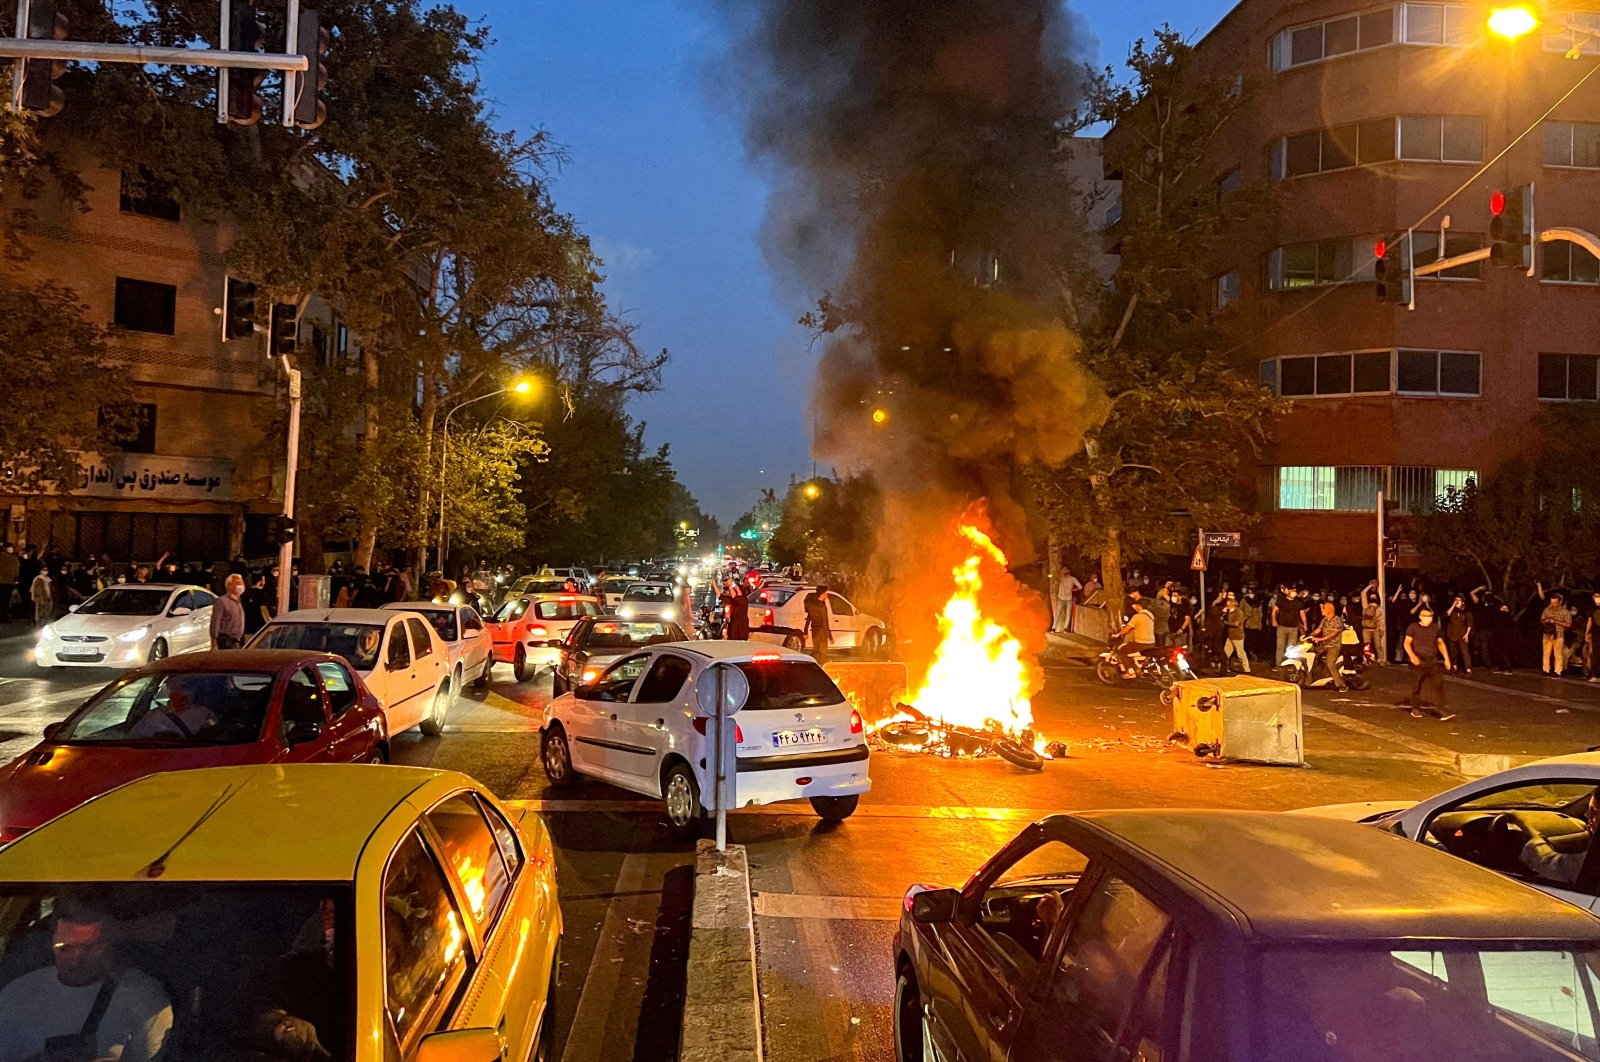 A police motorcycle burns during a protest over the death of Mahsa Amini, in Tehran, Iran, Sept. 19, 2022. (Reuters Photo)